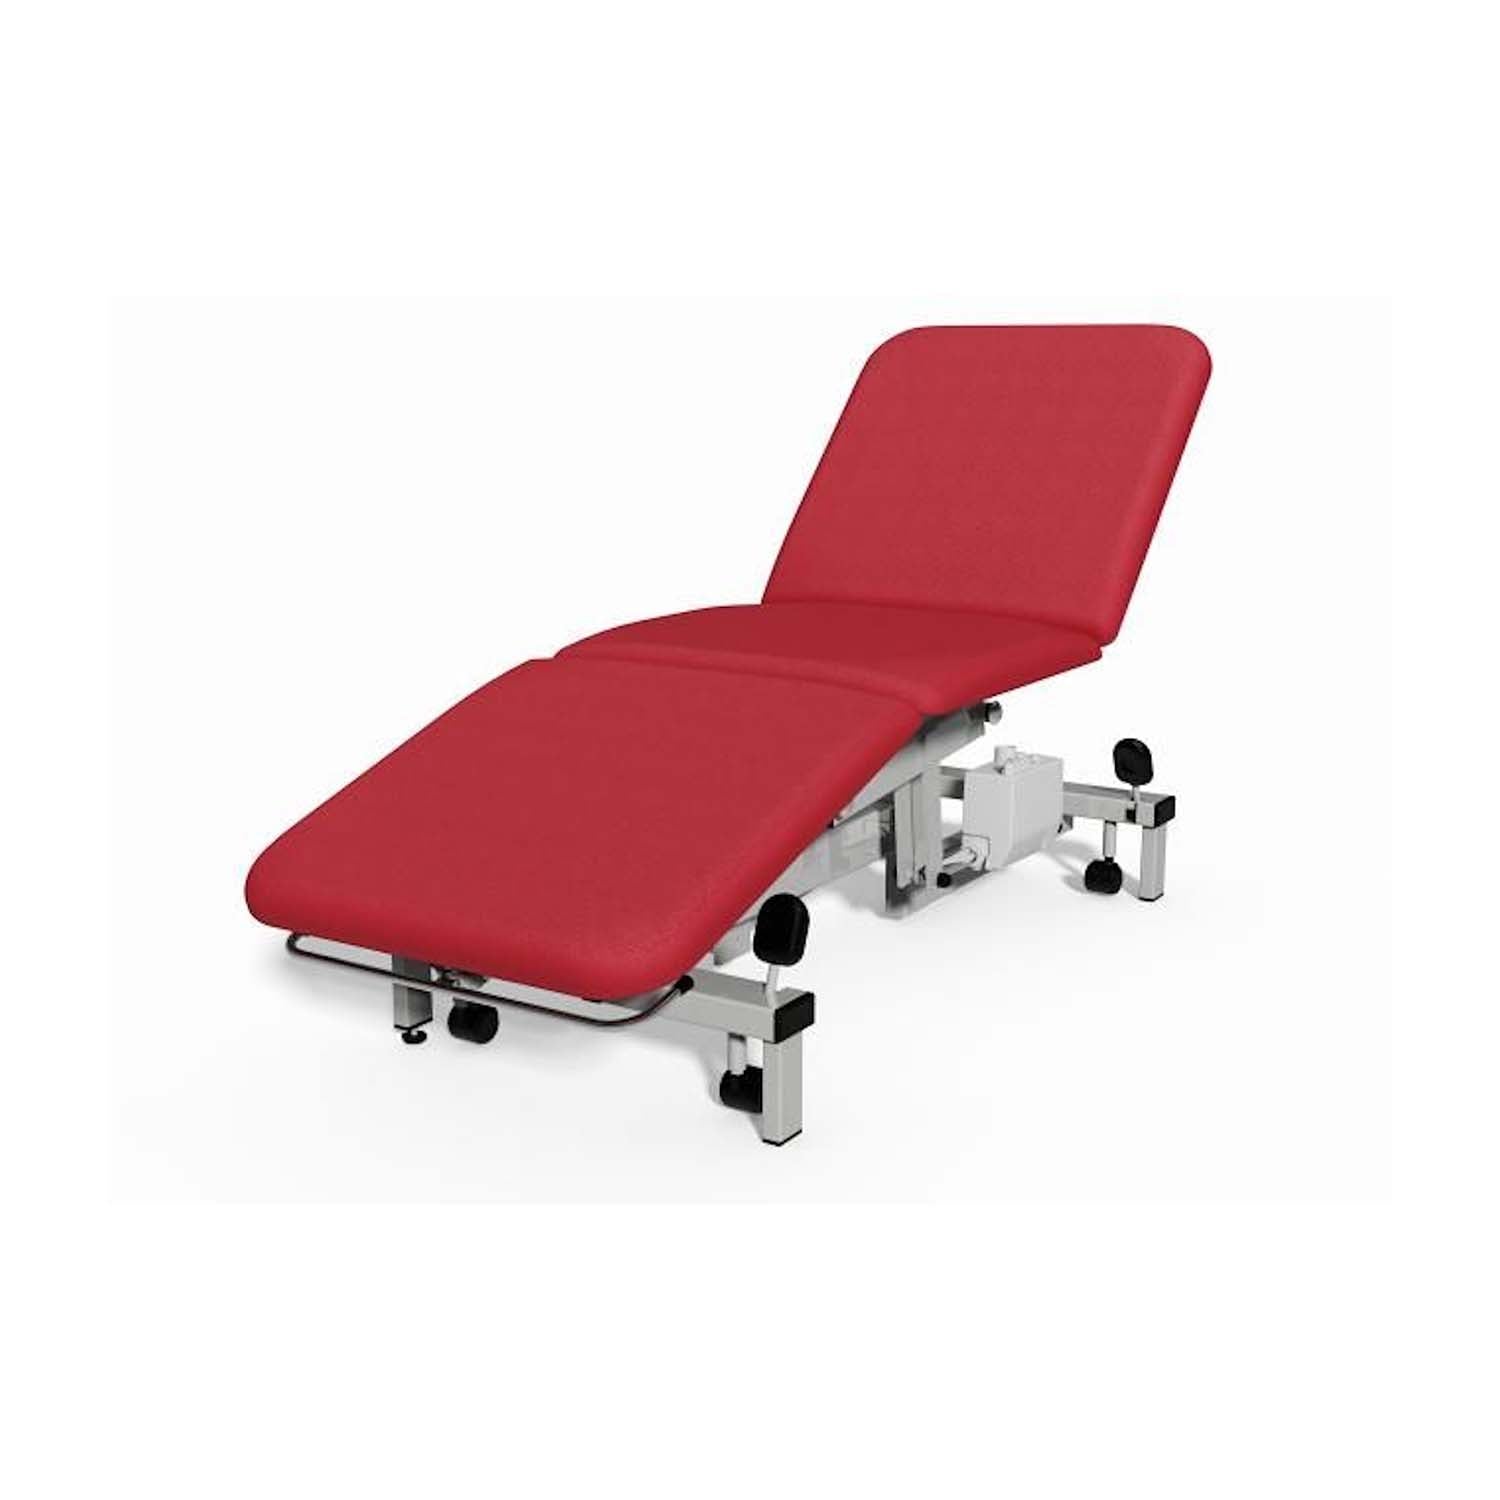 Plinth 2000 Model 503 3 Section Examination Couch | Hydraulic | Pillarbox